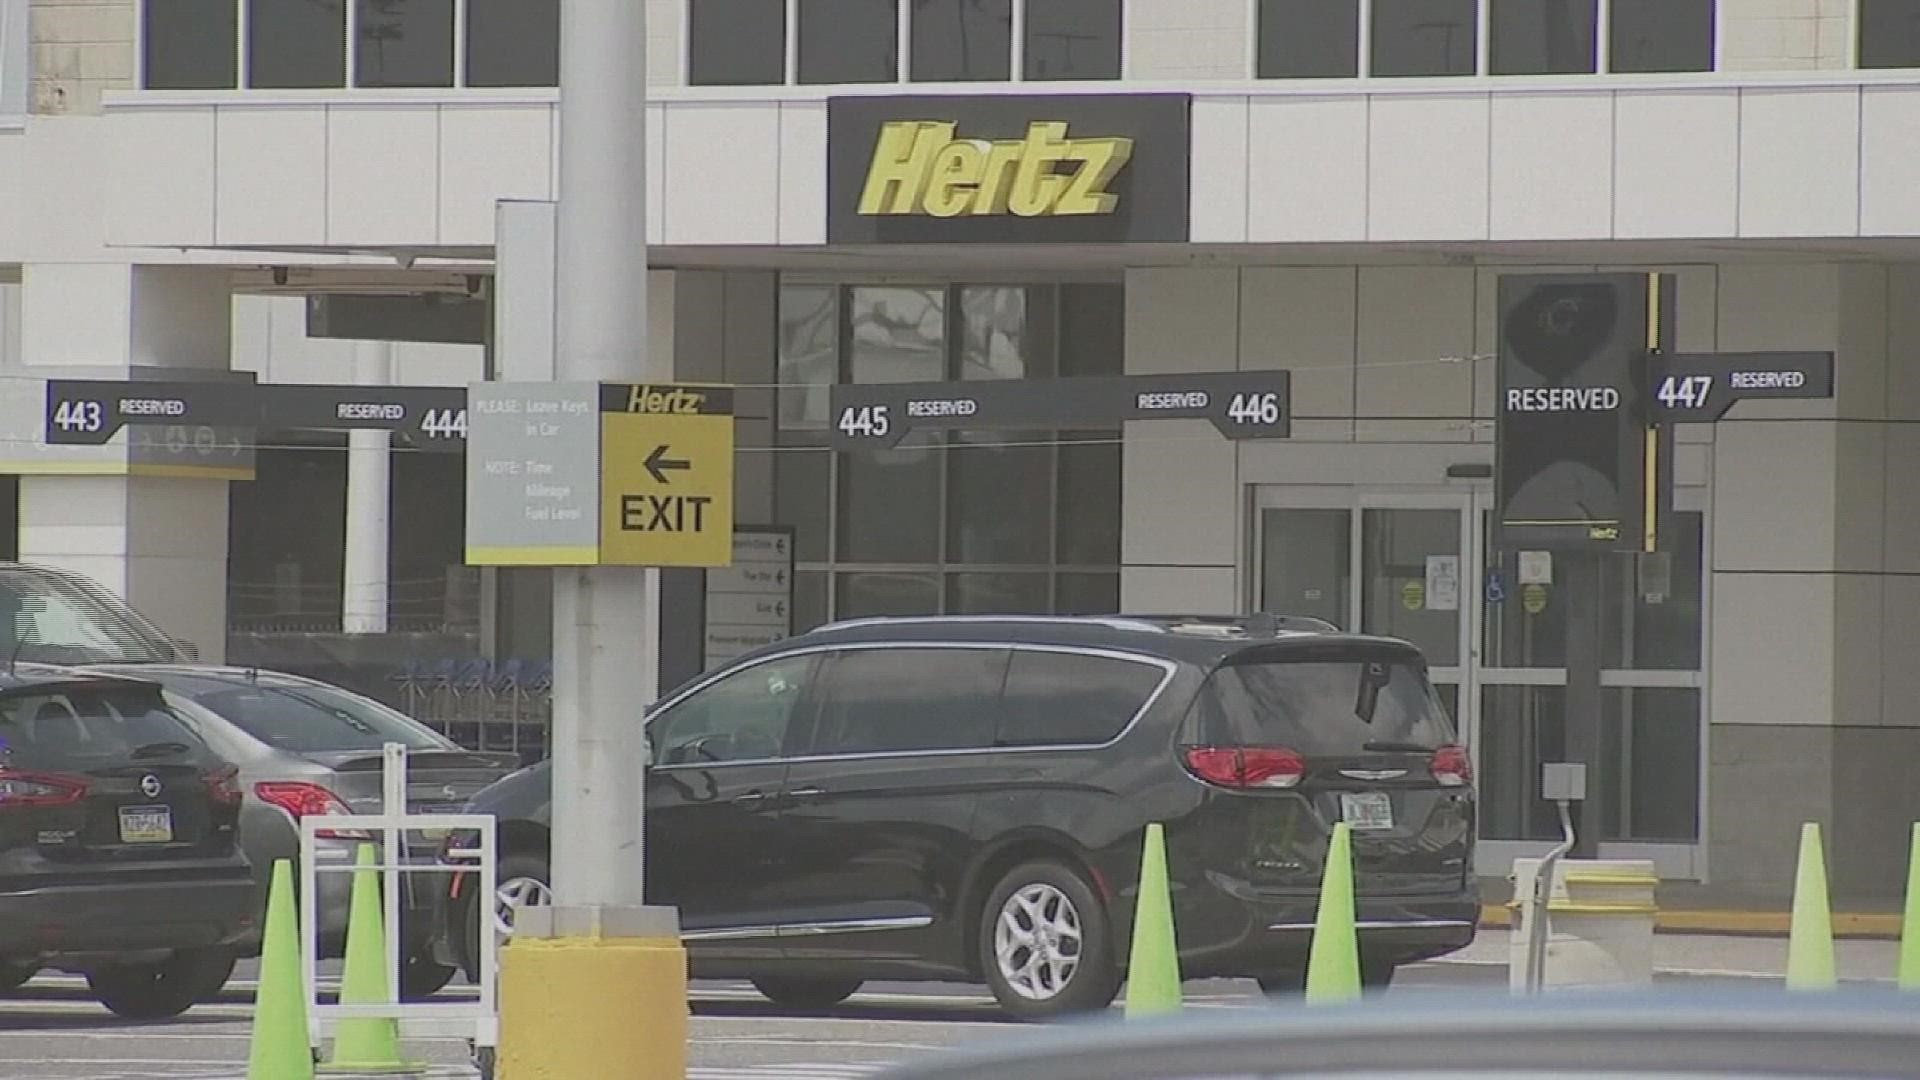 Hertz agrees to settle the majority of lawsuits from renters wrongly accused of stealing cars they had rented.